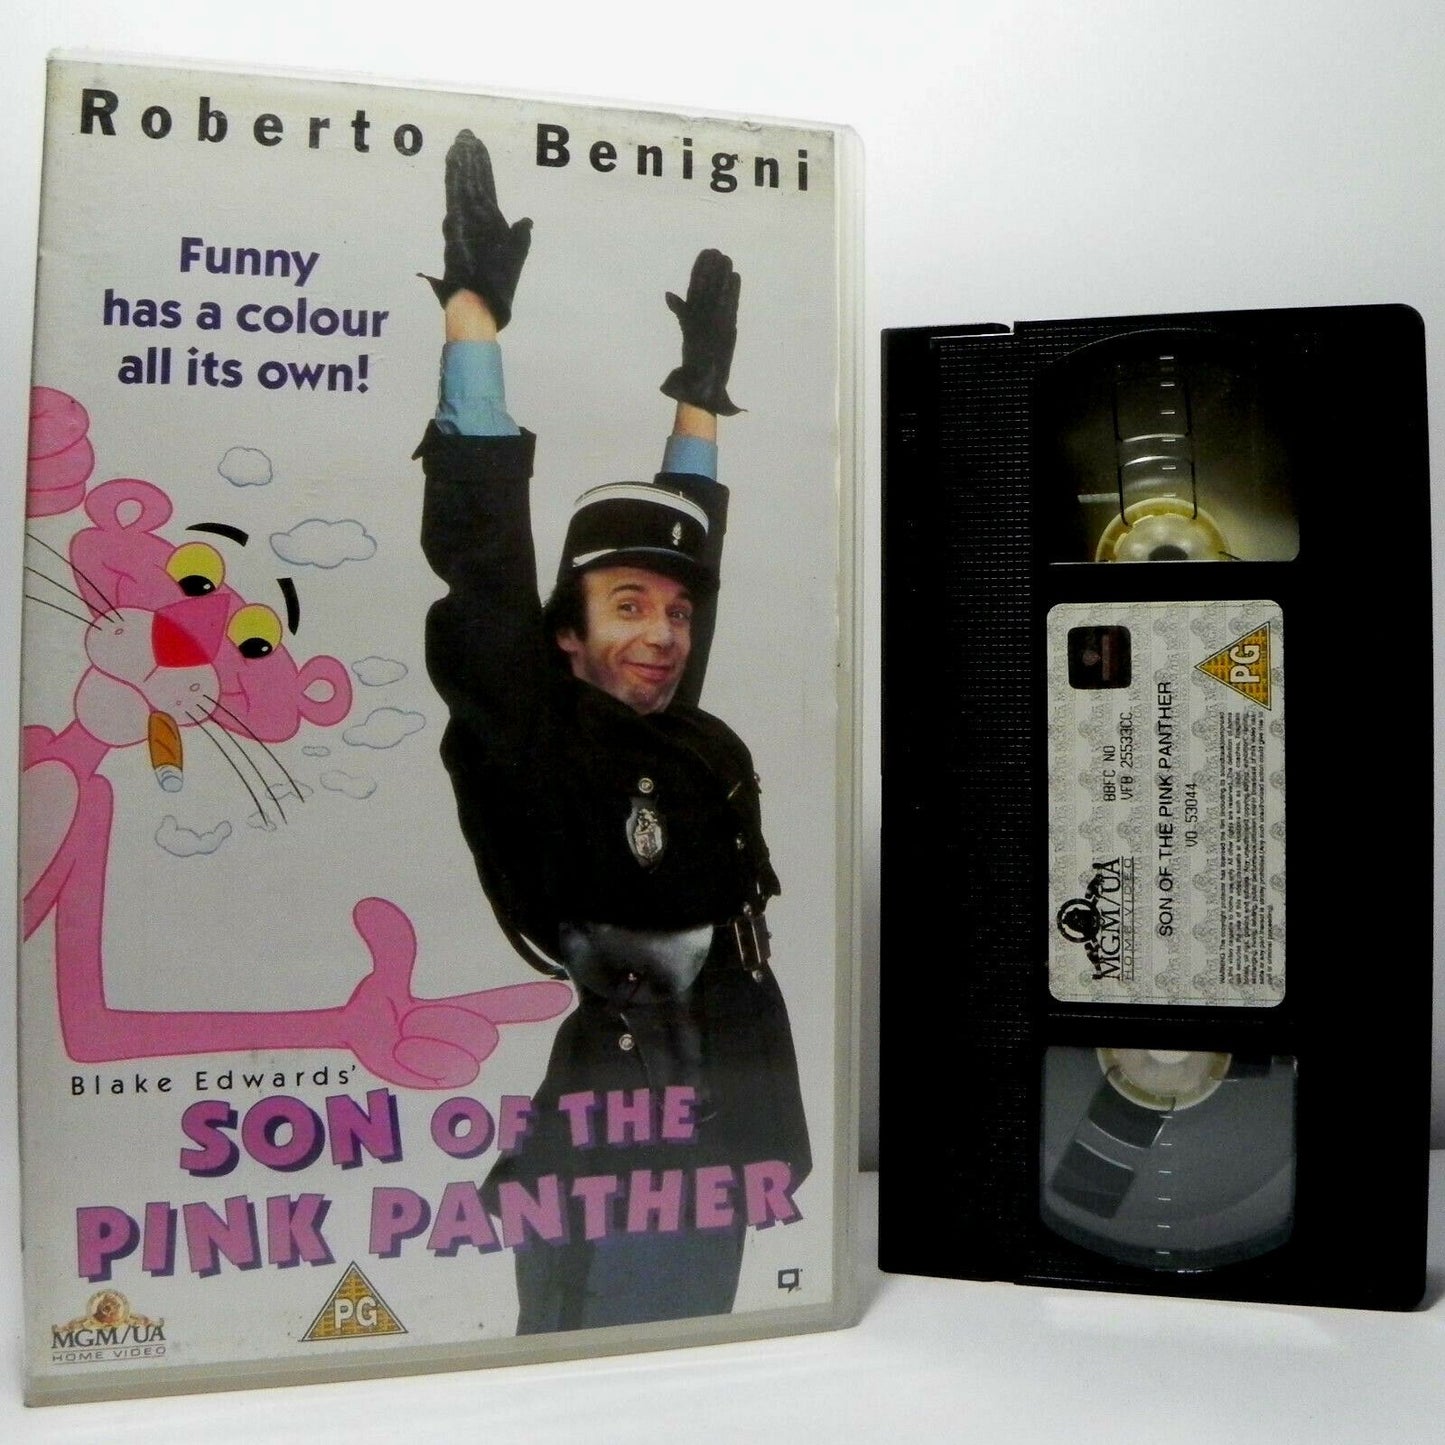 Son Of The Pink Panther - Large Box - (1993) Comedy - Robert Benigni - Pal VHS-